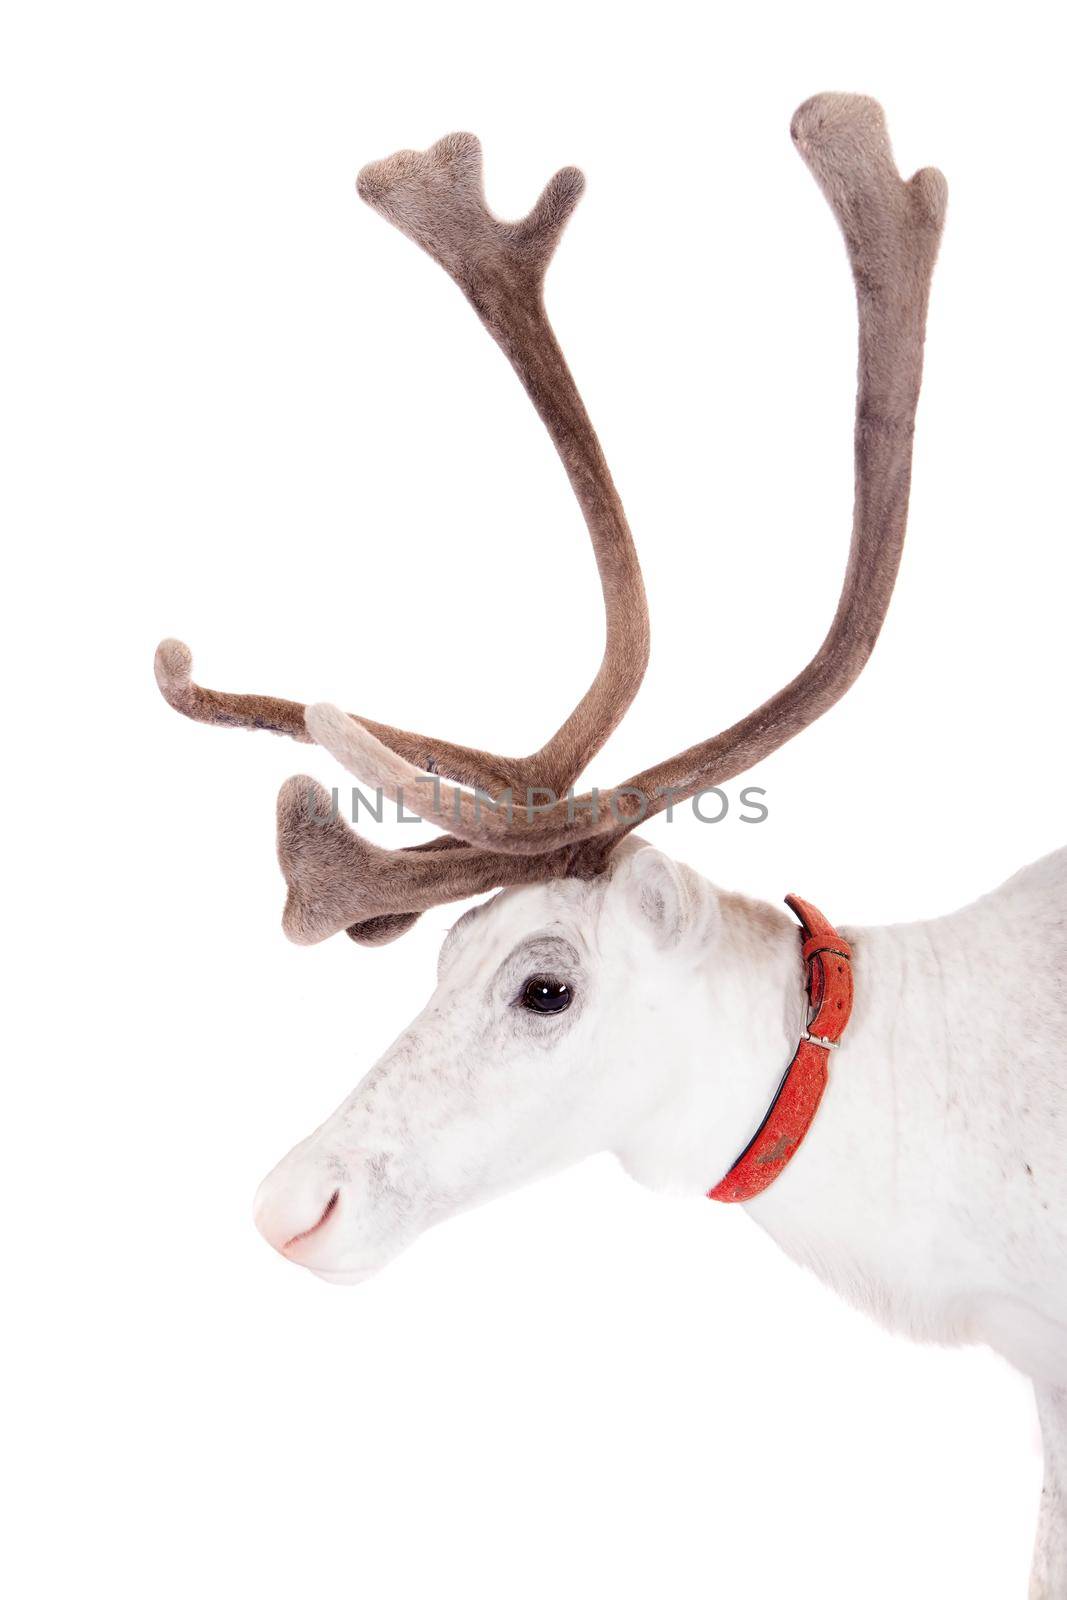 Reindeer or caribou, on the white background by RosaJay